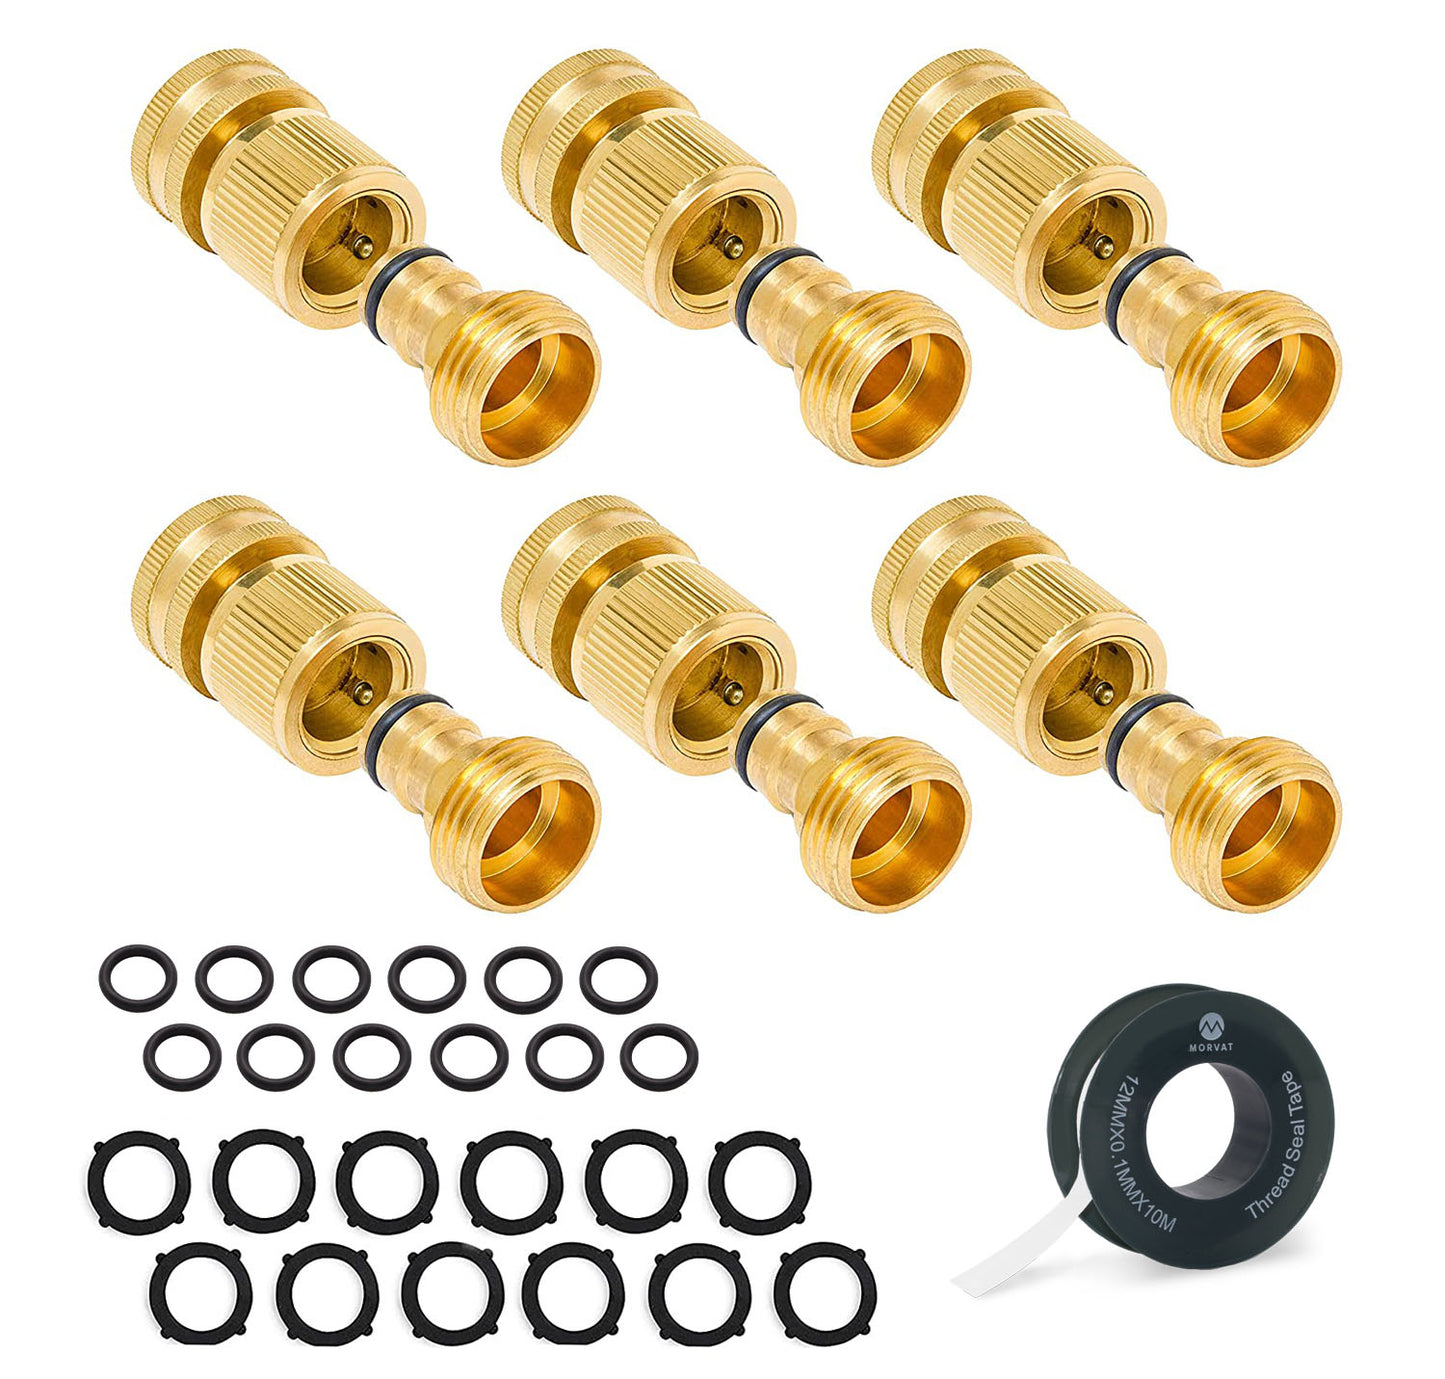 Brass Quick Connect Garden Hose Fittings for Source & Accessory Connections